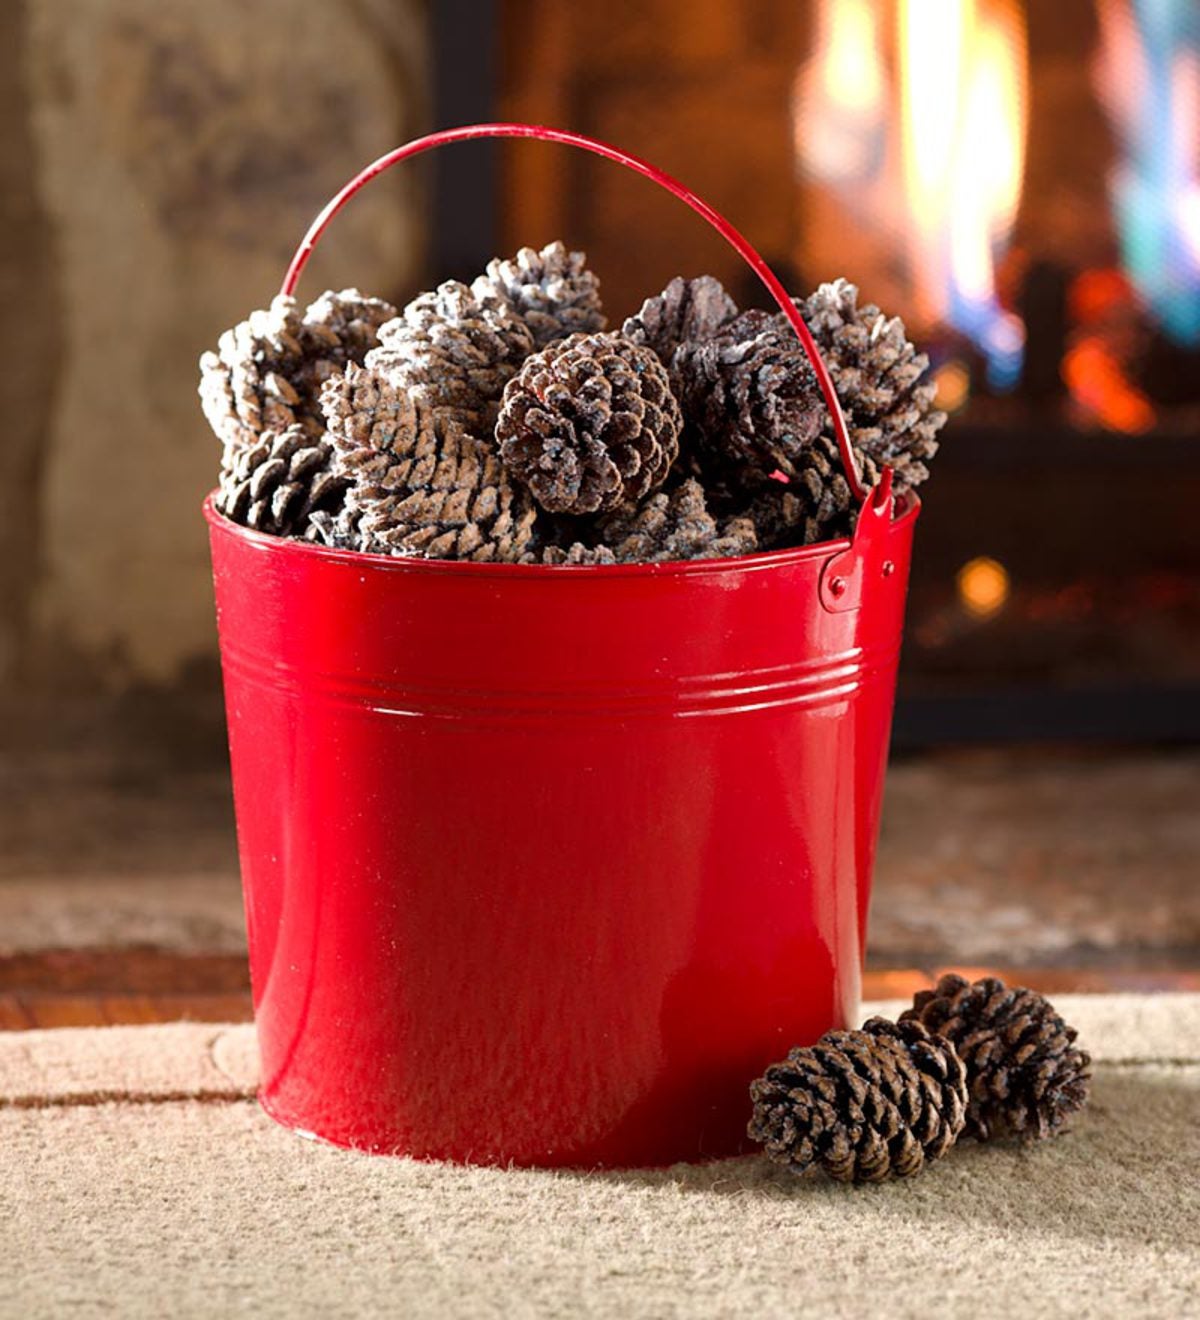 Fireplace Color-Changing Color Cones in Red Metal Bucket